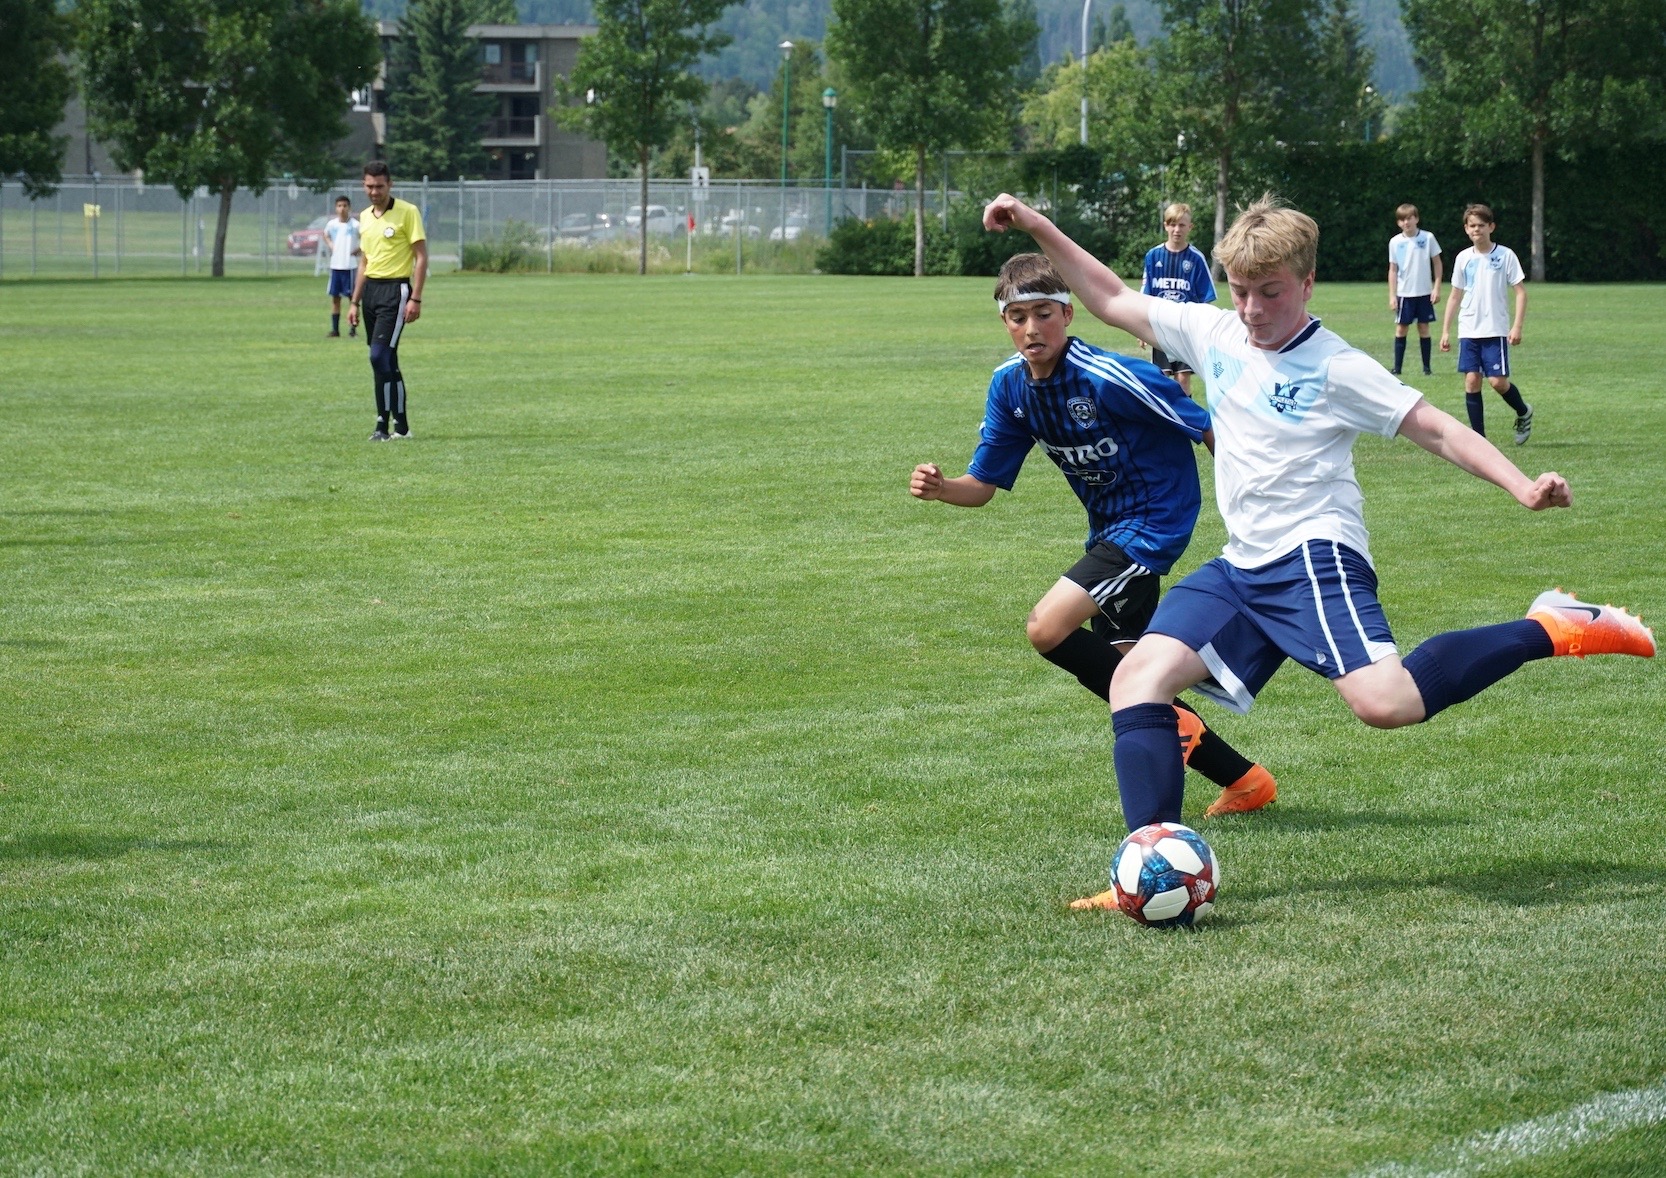 Province Cup Soccer